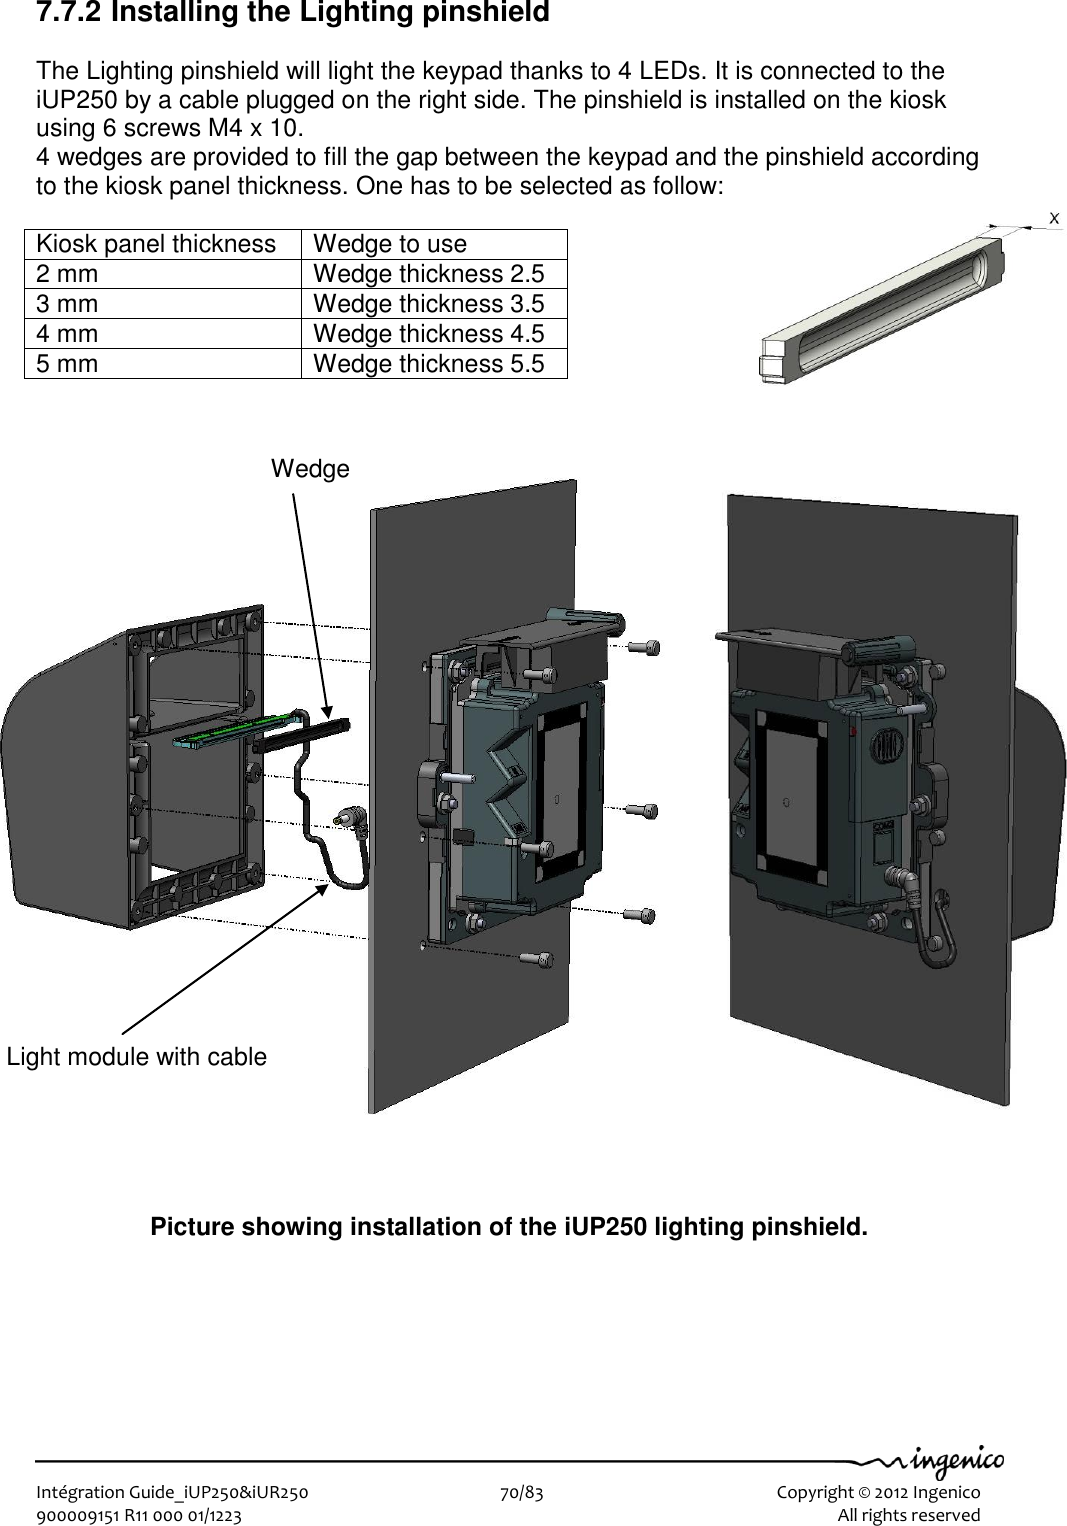   Intégration Guide_iUP250&amp;iUR250                        70/83    Copyright © 2012 Ingenico 900009151 R11 000 01/1223      All rights reserved   7.7.2 Installing the Lighting pinshield  The Lighting pinshield will light the keypad thanks to 4 LEDs. It is connected to the iUP250 by a cable plugged on the right side. The pinshield is installed on the kiosk using 6 screws M4 x 10.  4 wedges are provided to fill the gap between the keypad and the pinshield according to the kiosk panel thickness. One has to be selected as follow:  Kiosk panel thickness Wedge to use 2 mm Wedge thickness 2.5 3 mm Wedge thickness 3.5 4 mm Wedge thickness 4.5 5 mm Wedge thickness 5.5                              Picture showing installation of the iUP250 lighting pinshield. Wedge Light module with cable 